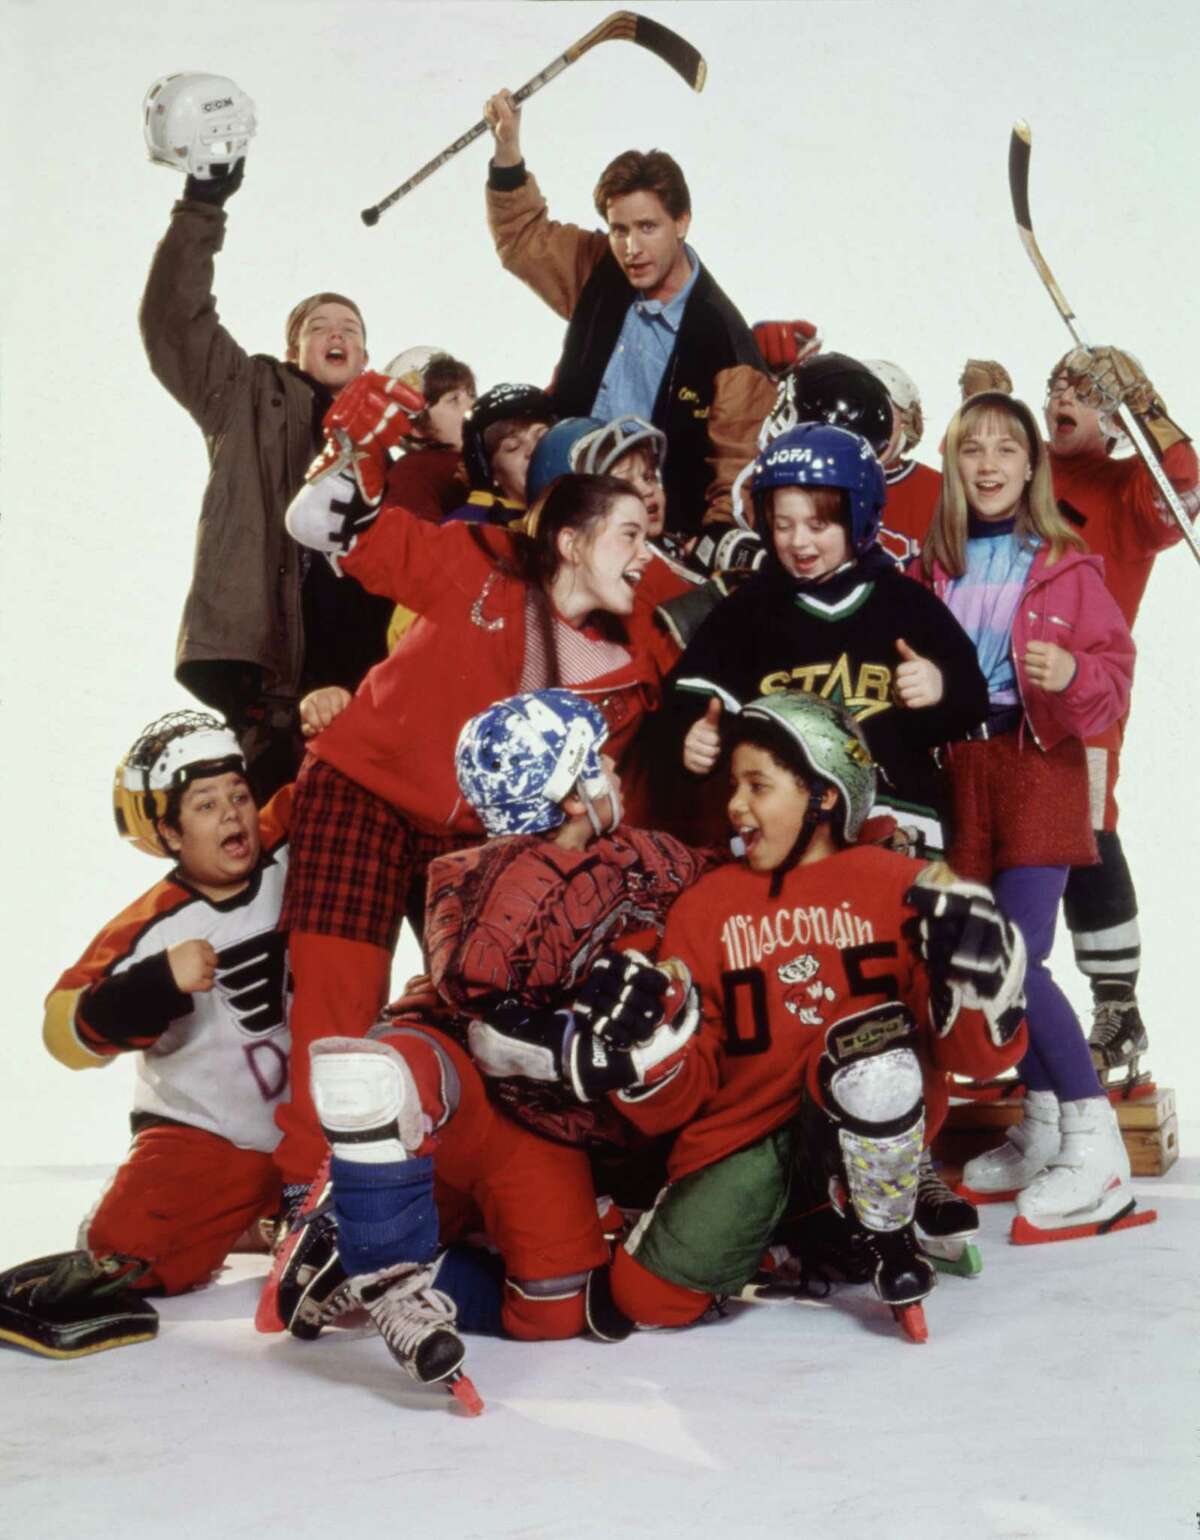 'The Mighty Ducks' (1992) was a movie before becoming an actual NHL franchise.